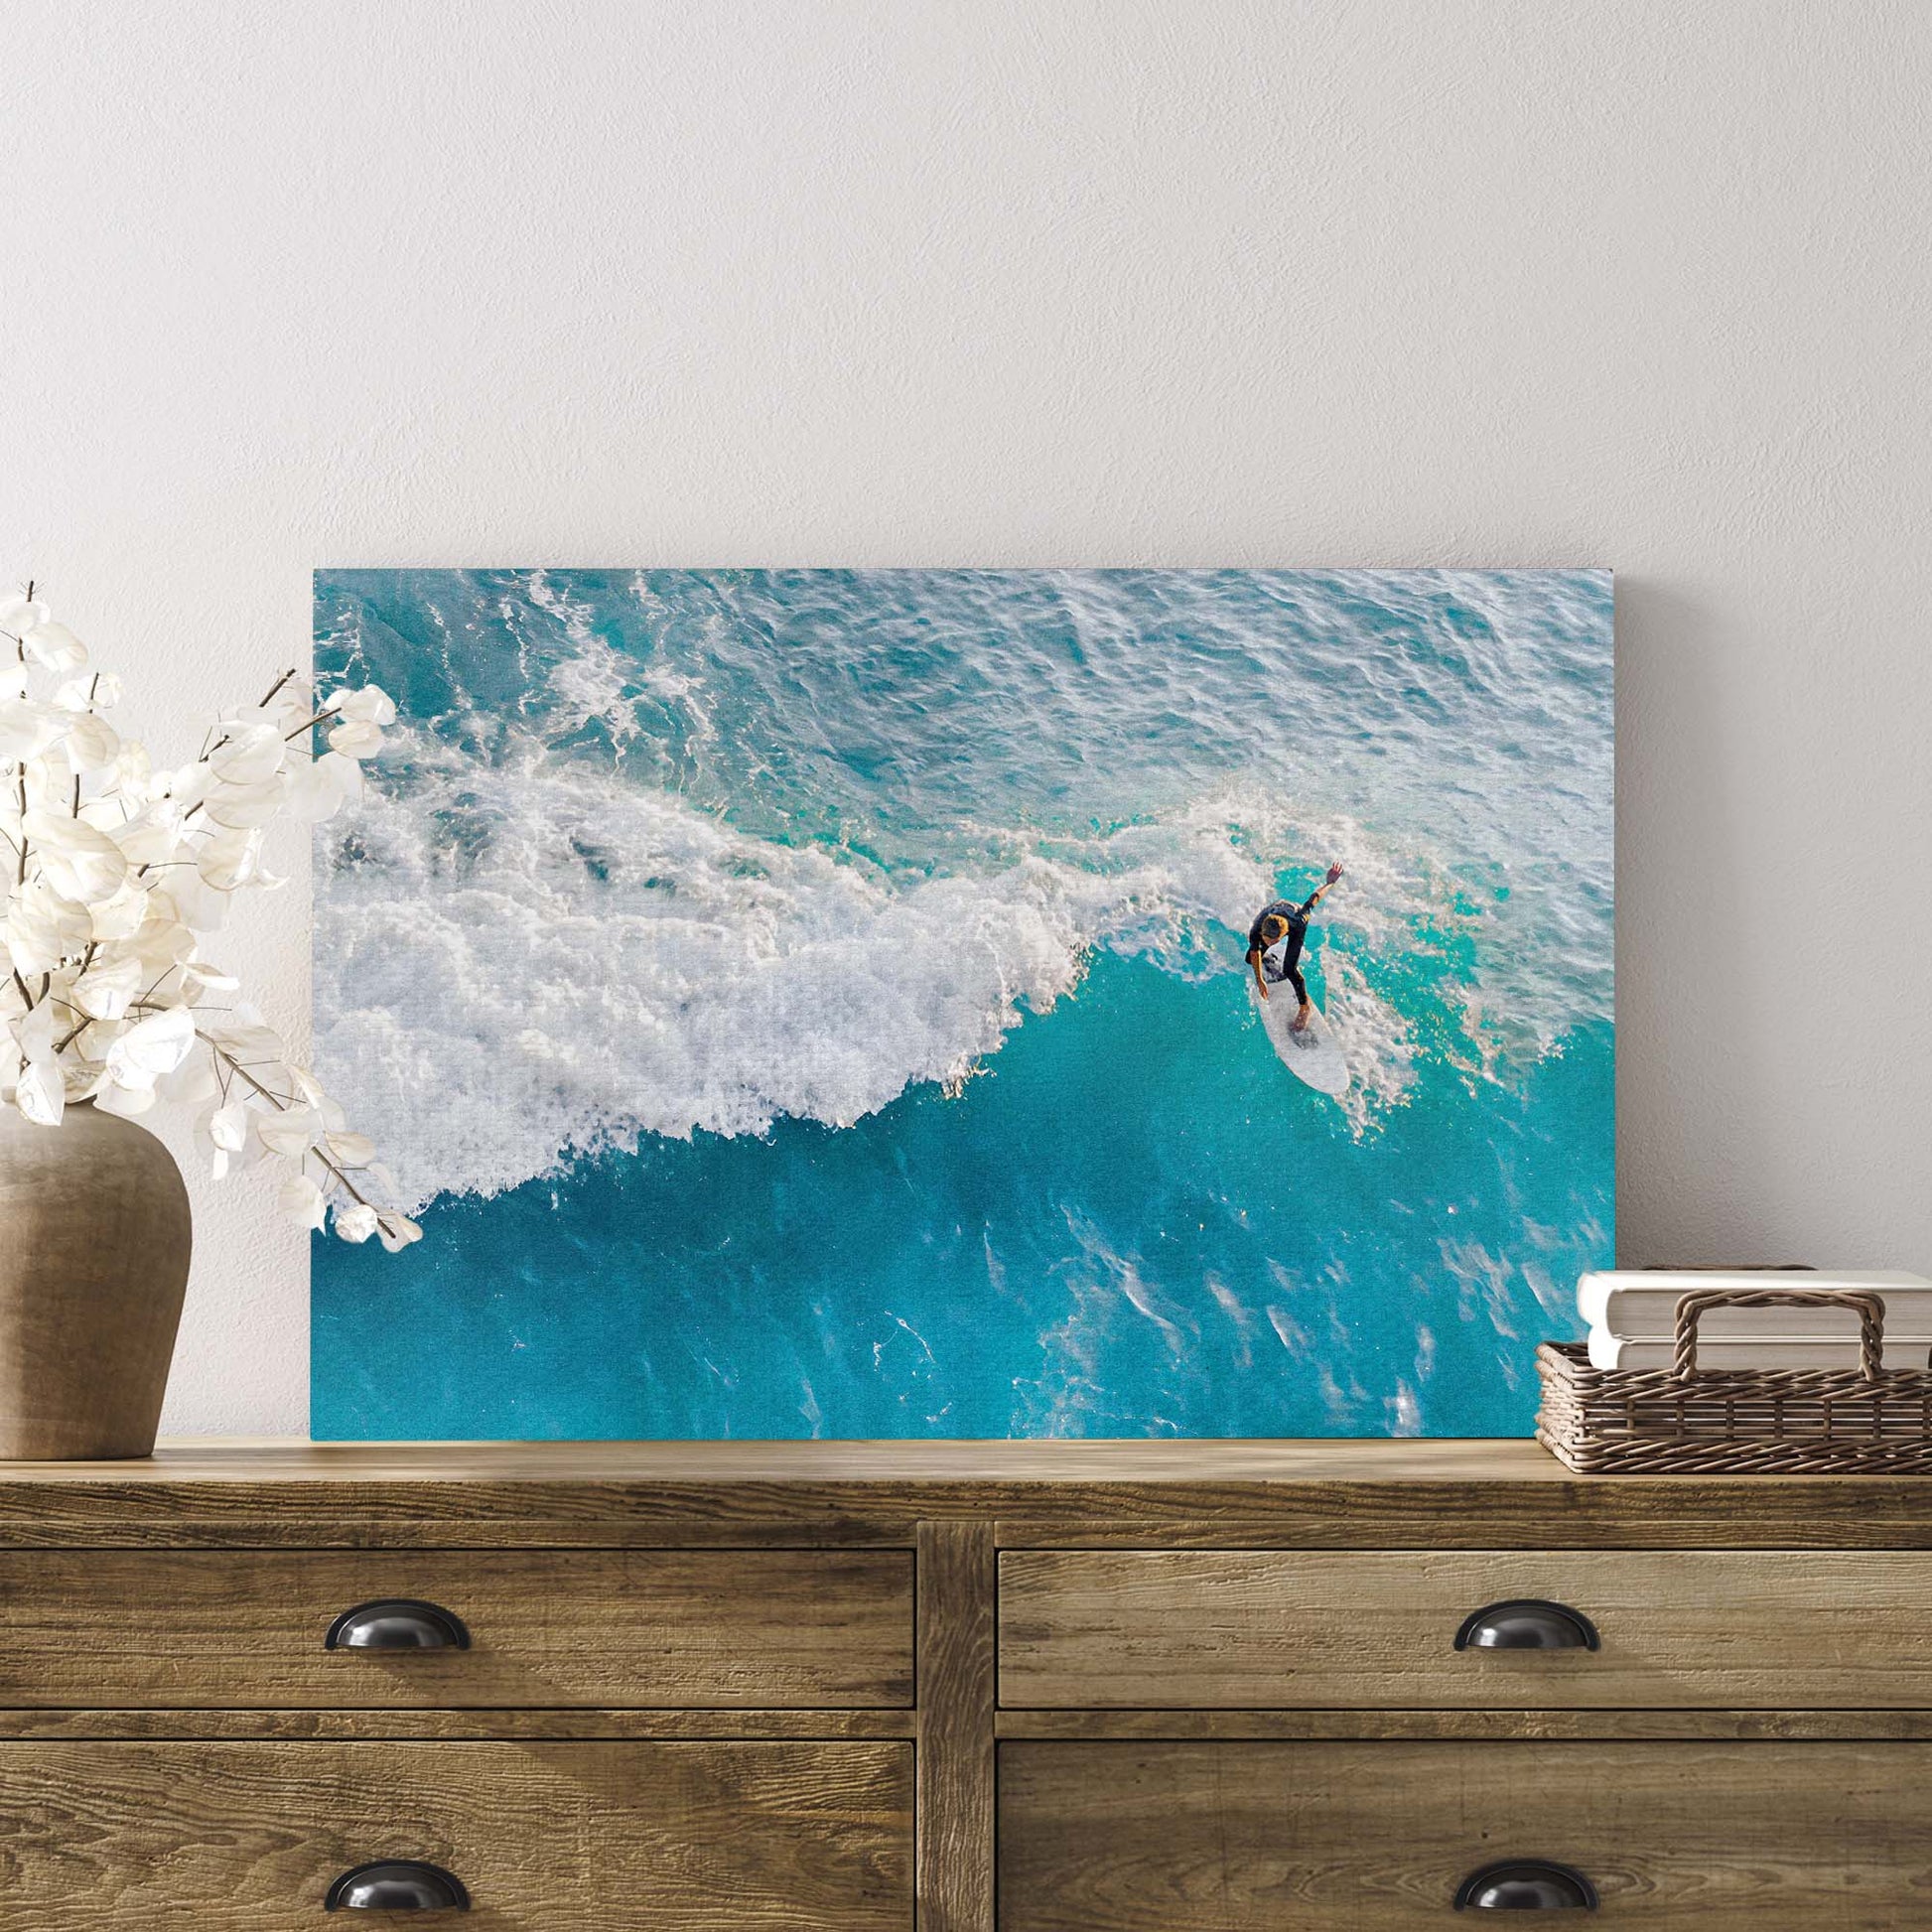 Surfing Crest Wave Canvas Wall Art - Image by Tailored Canvases